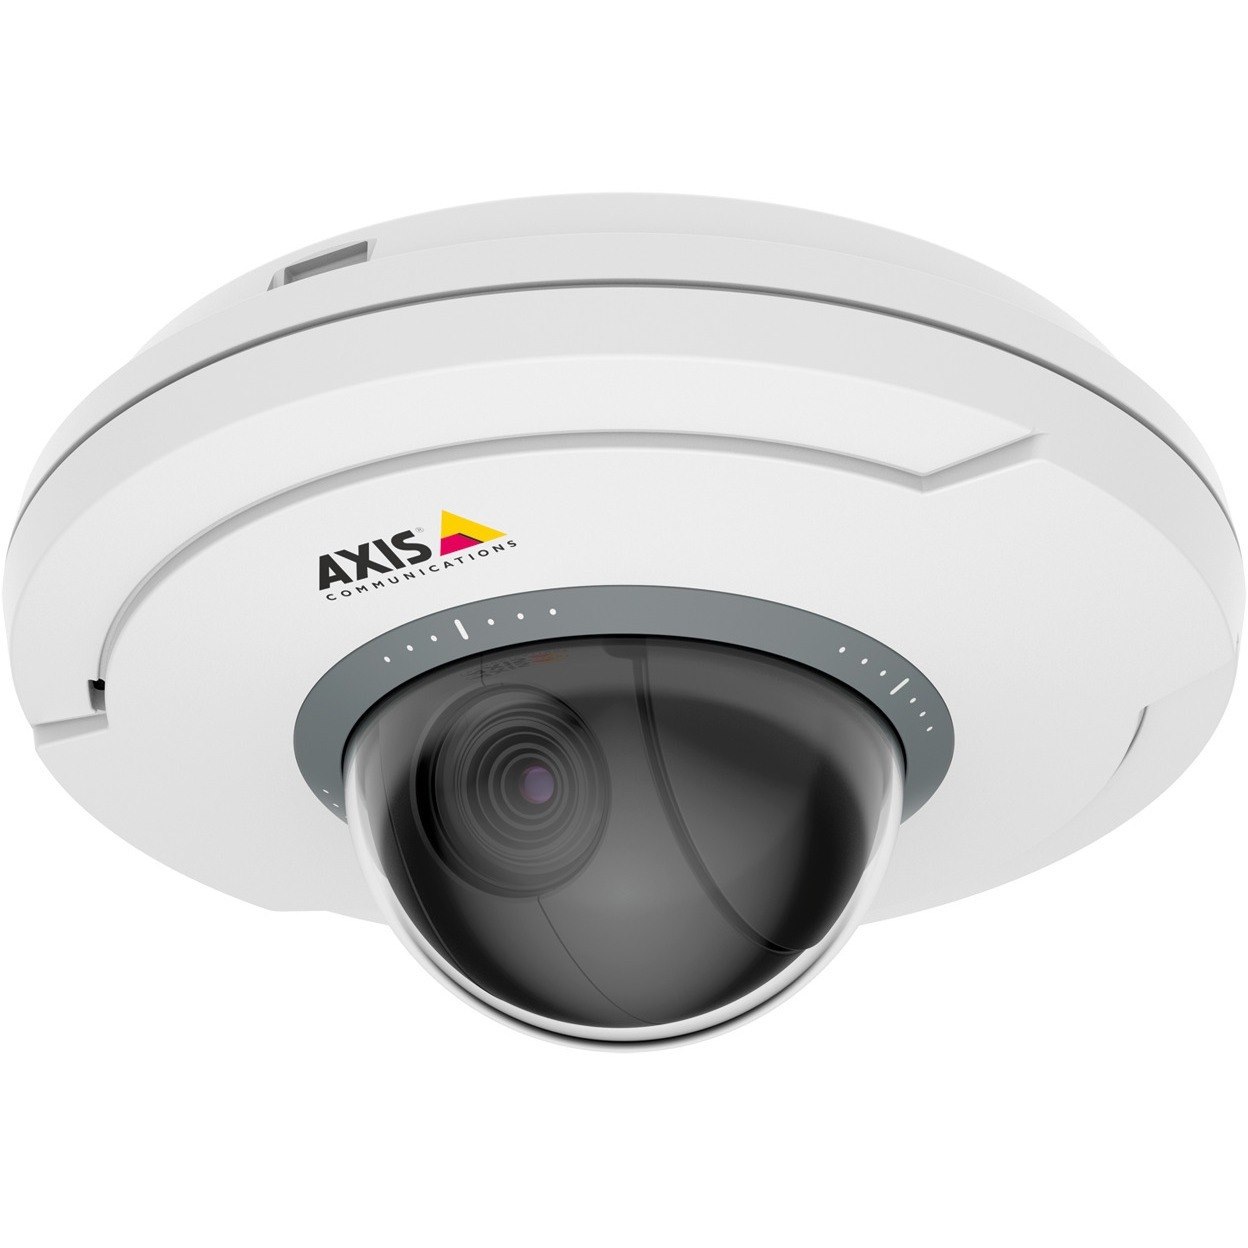 AXIS M5075 Full HD Network Camera - Colour - White